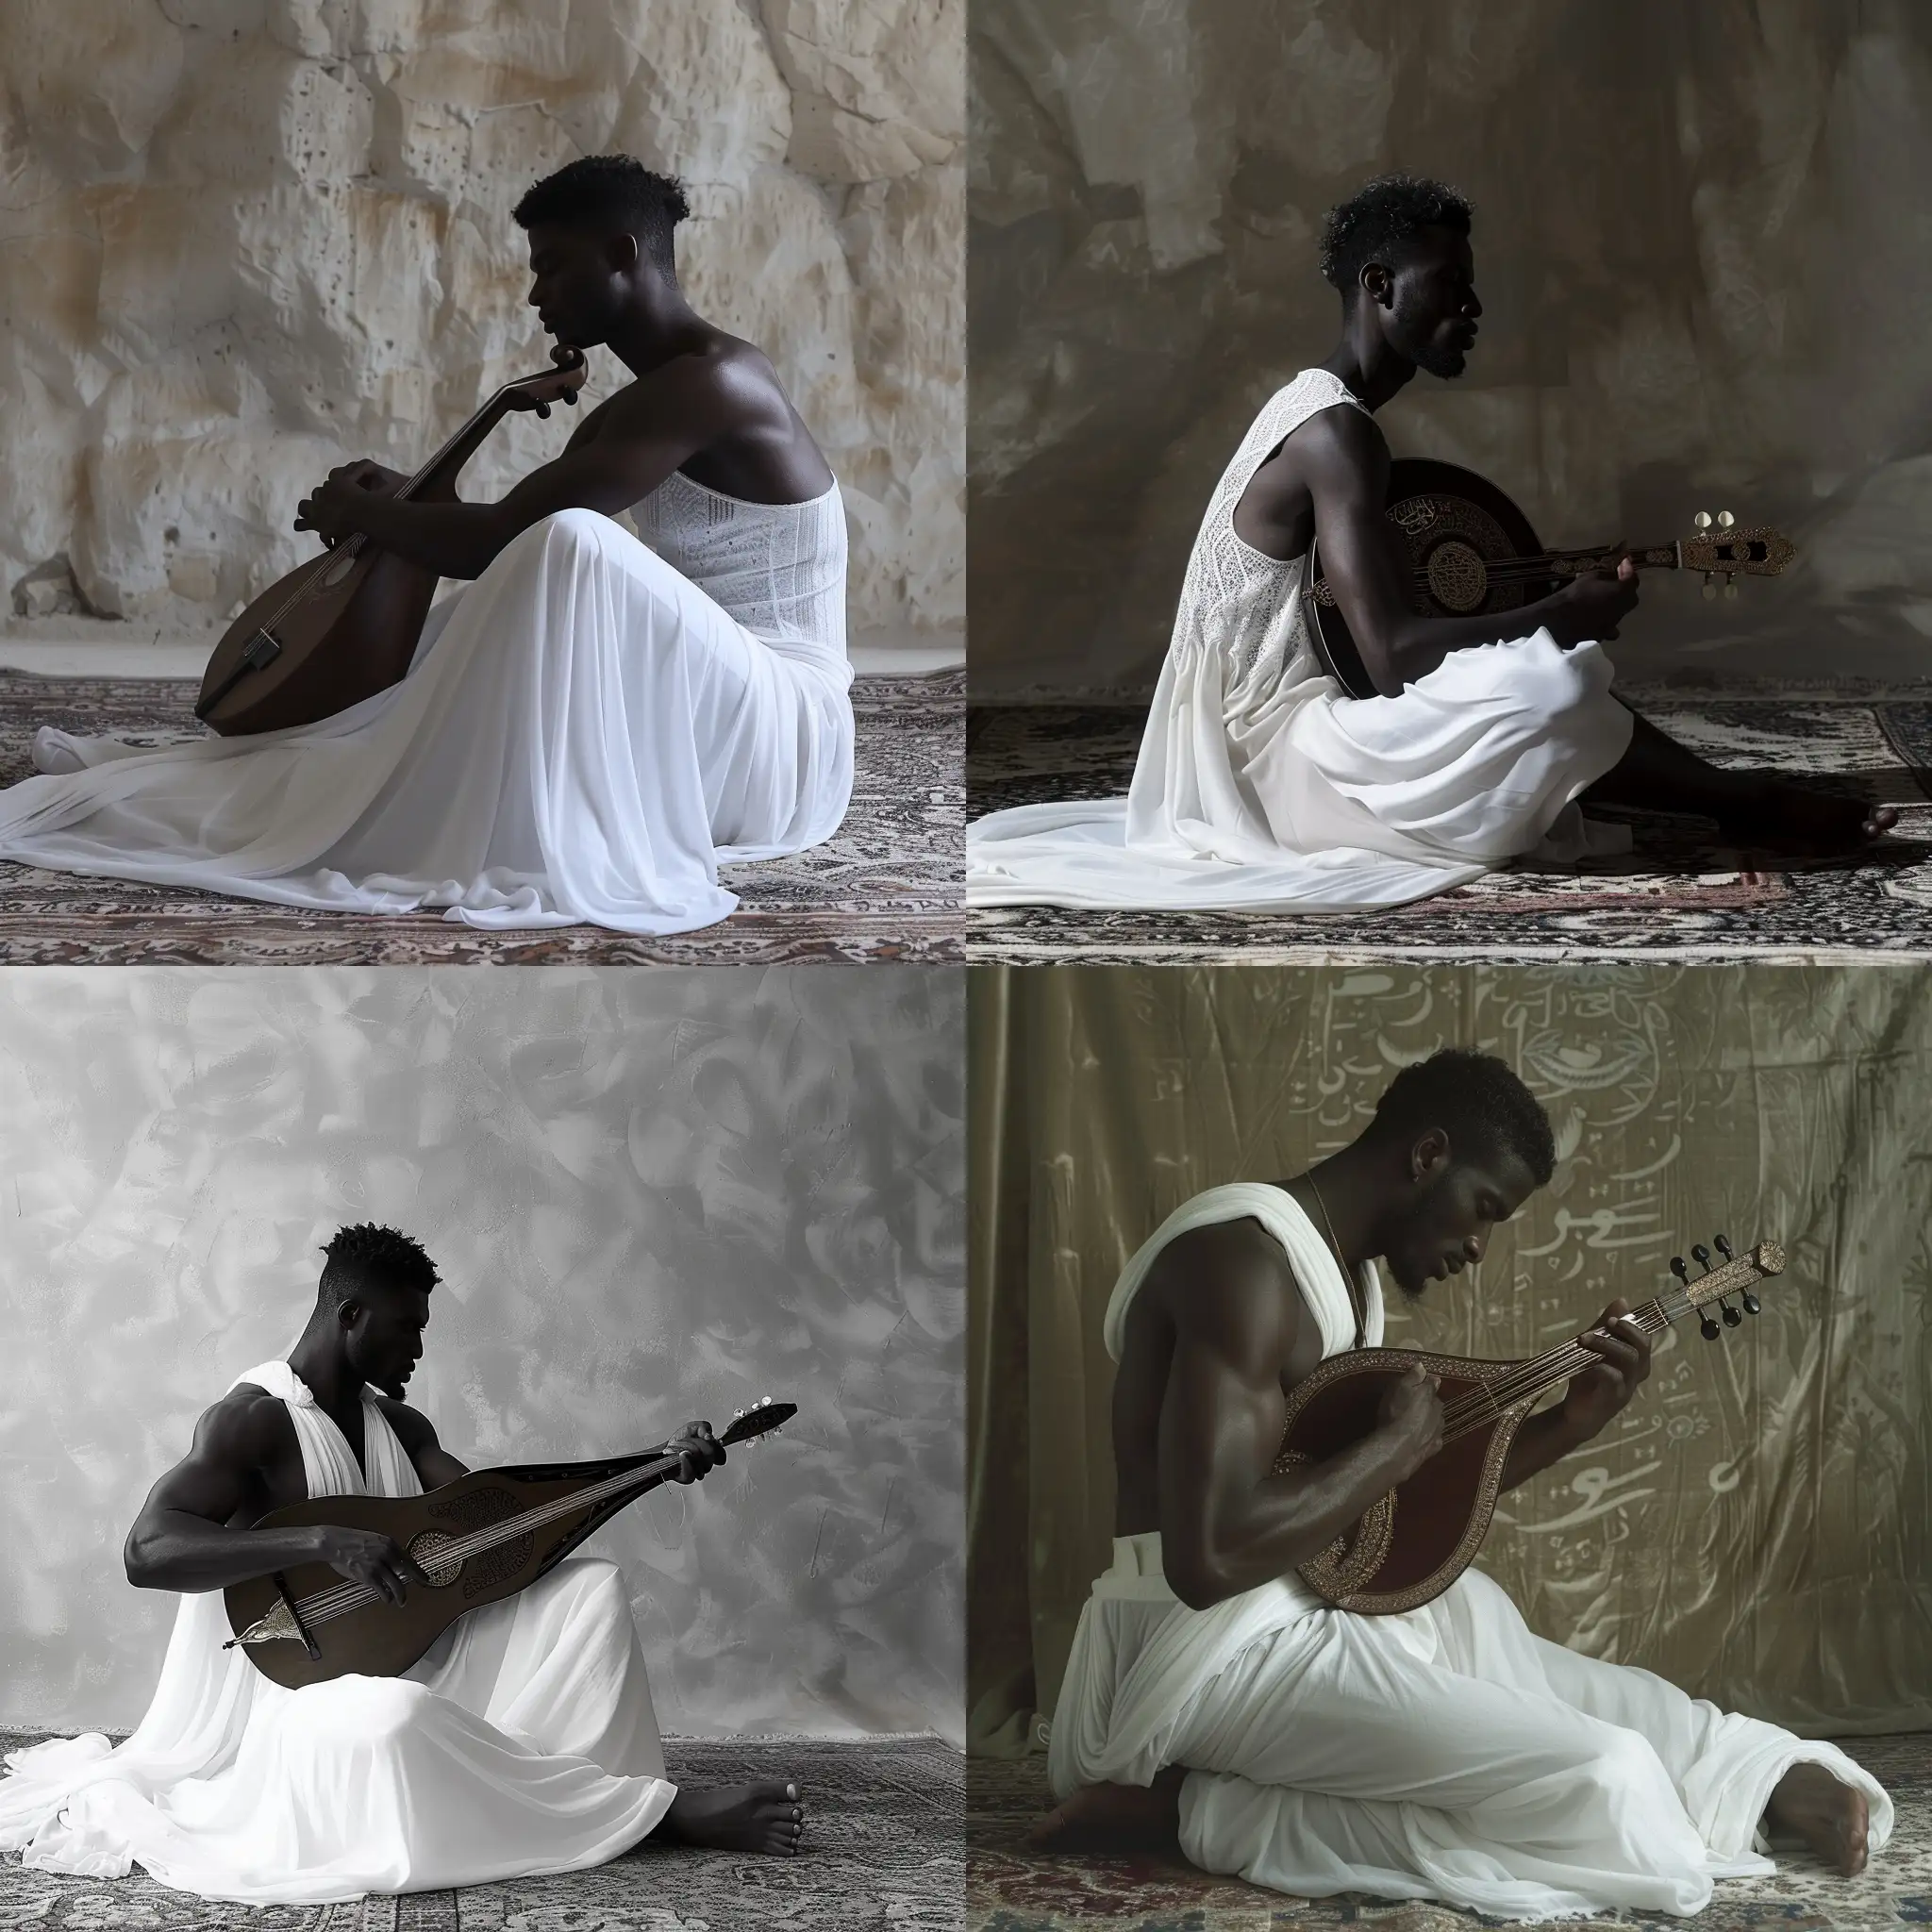 9oA picture from the side of a Saudi black man skinny wearing a white dress, sitting cross-legged on the carpet and playing the Arabic oud